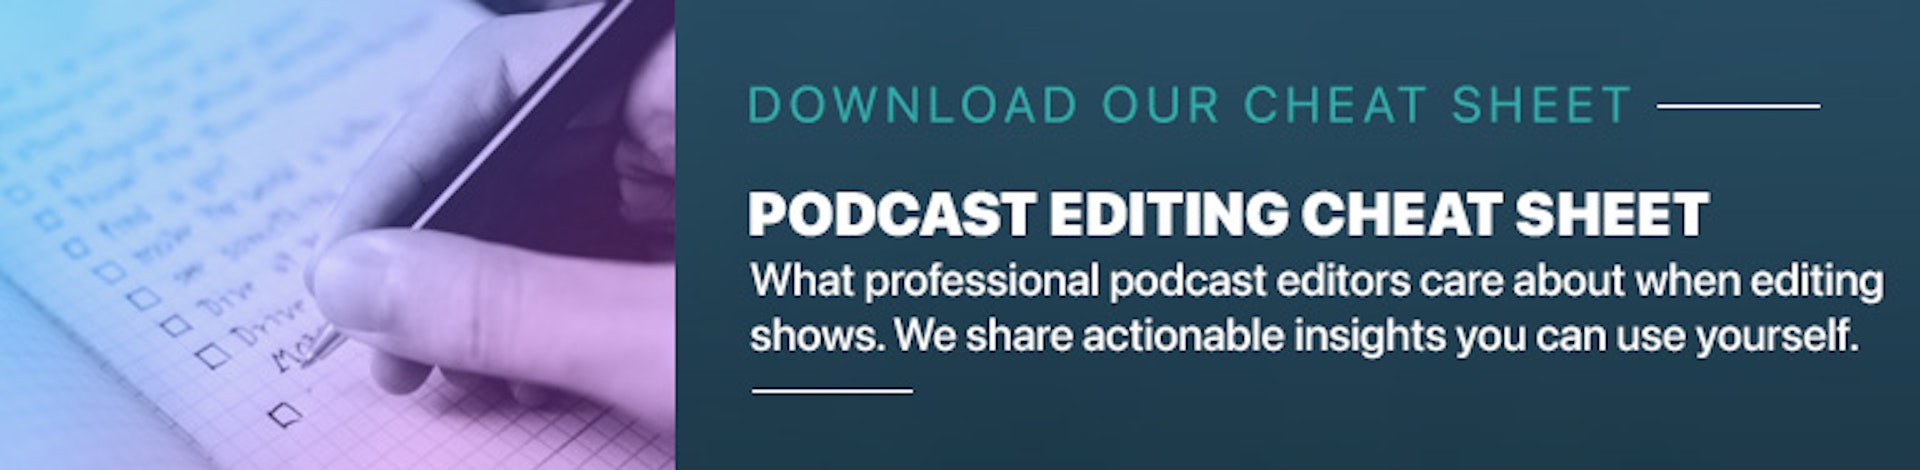 Download the Podcast Editing Cheat Sheet by The Podcast Consultant